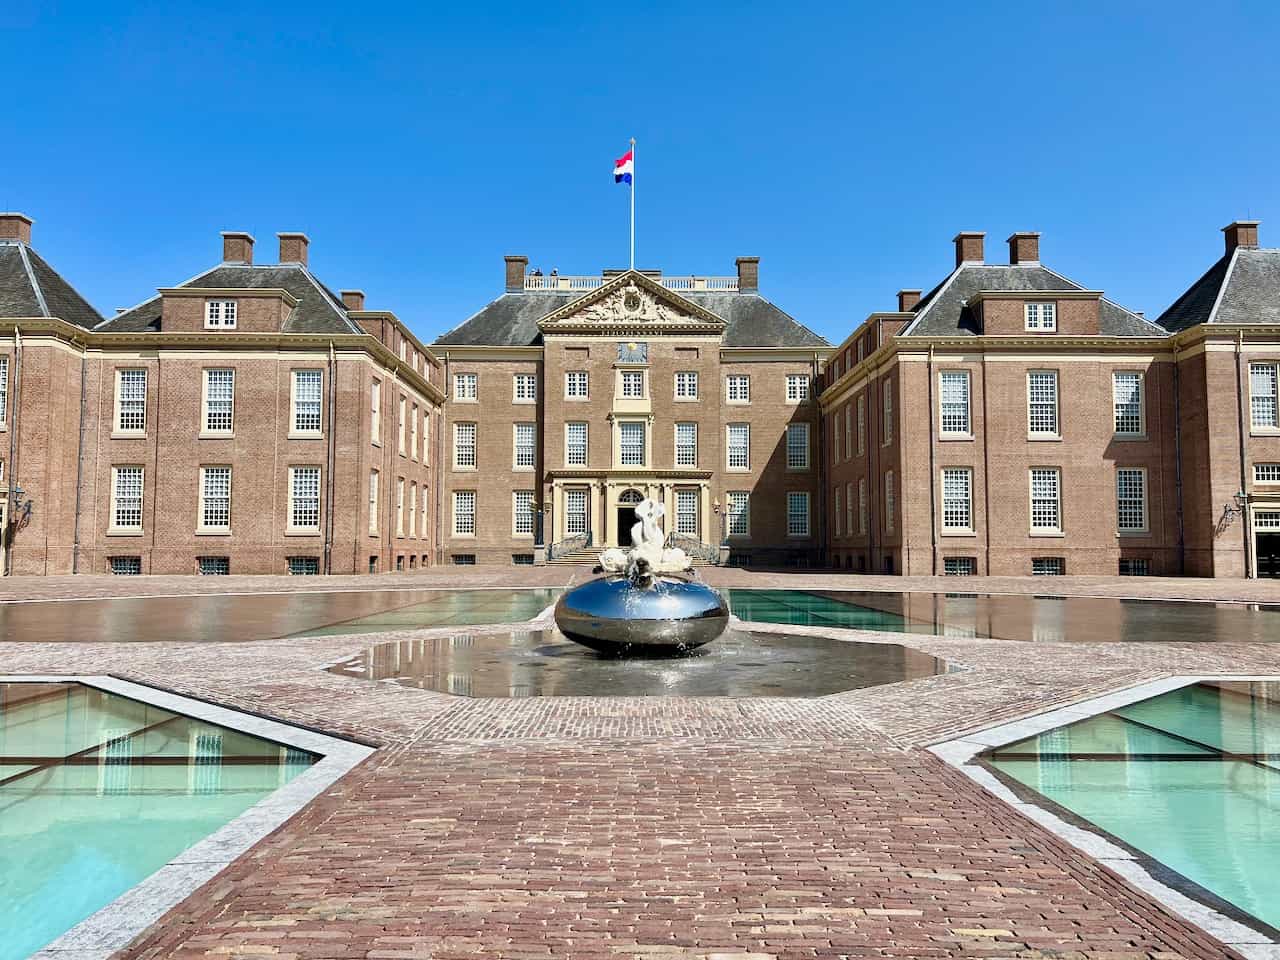 A visit to Het Loo Palace